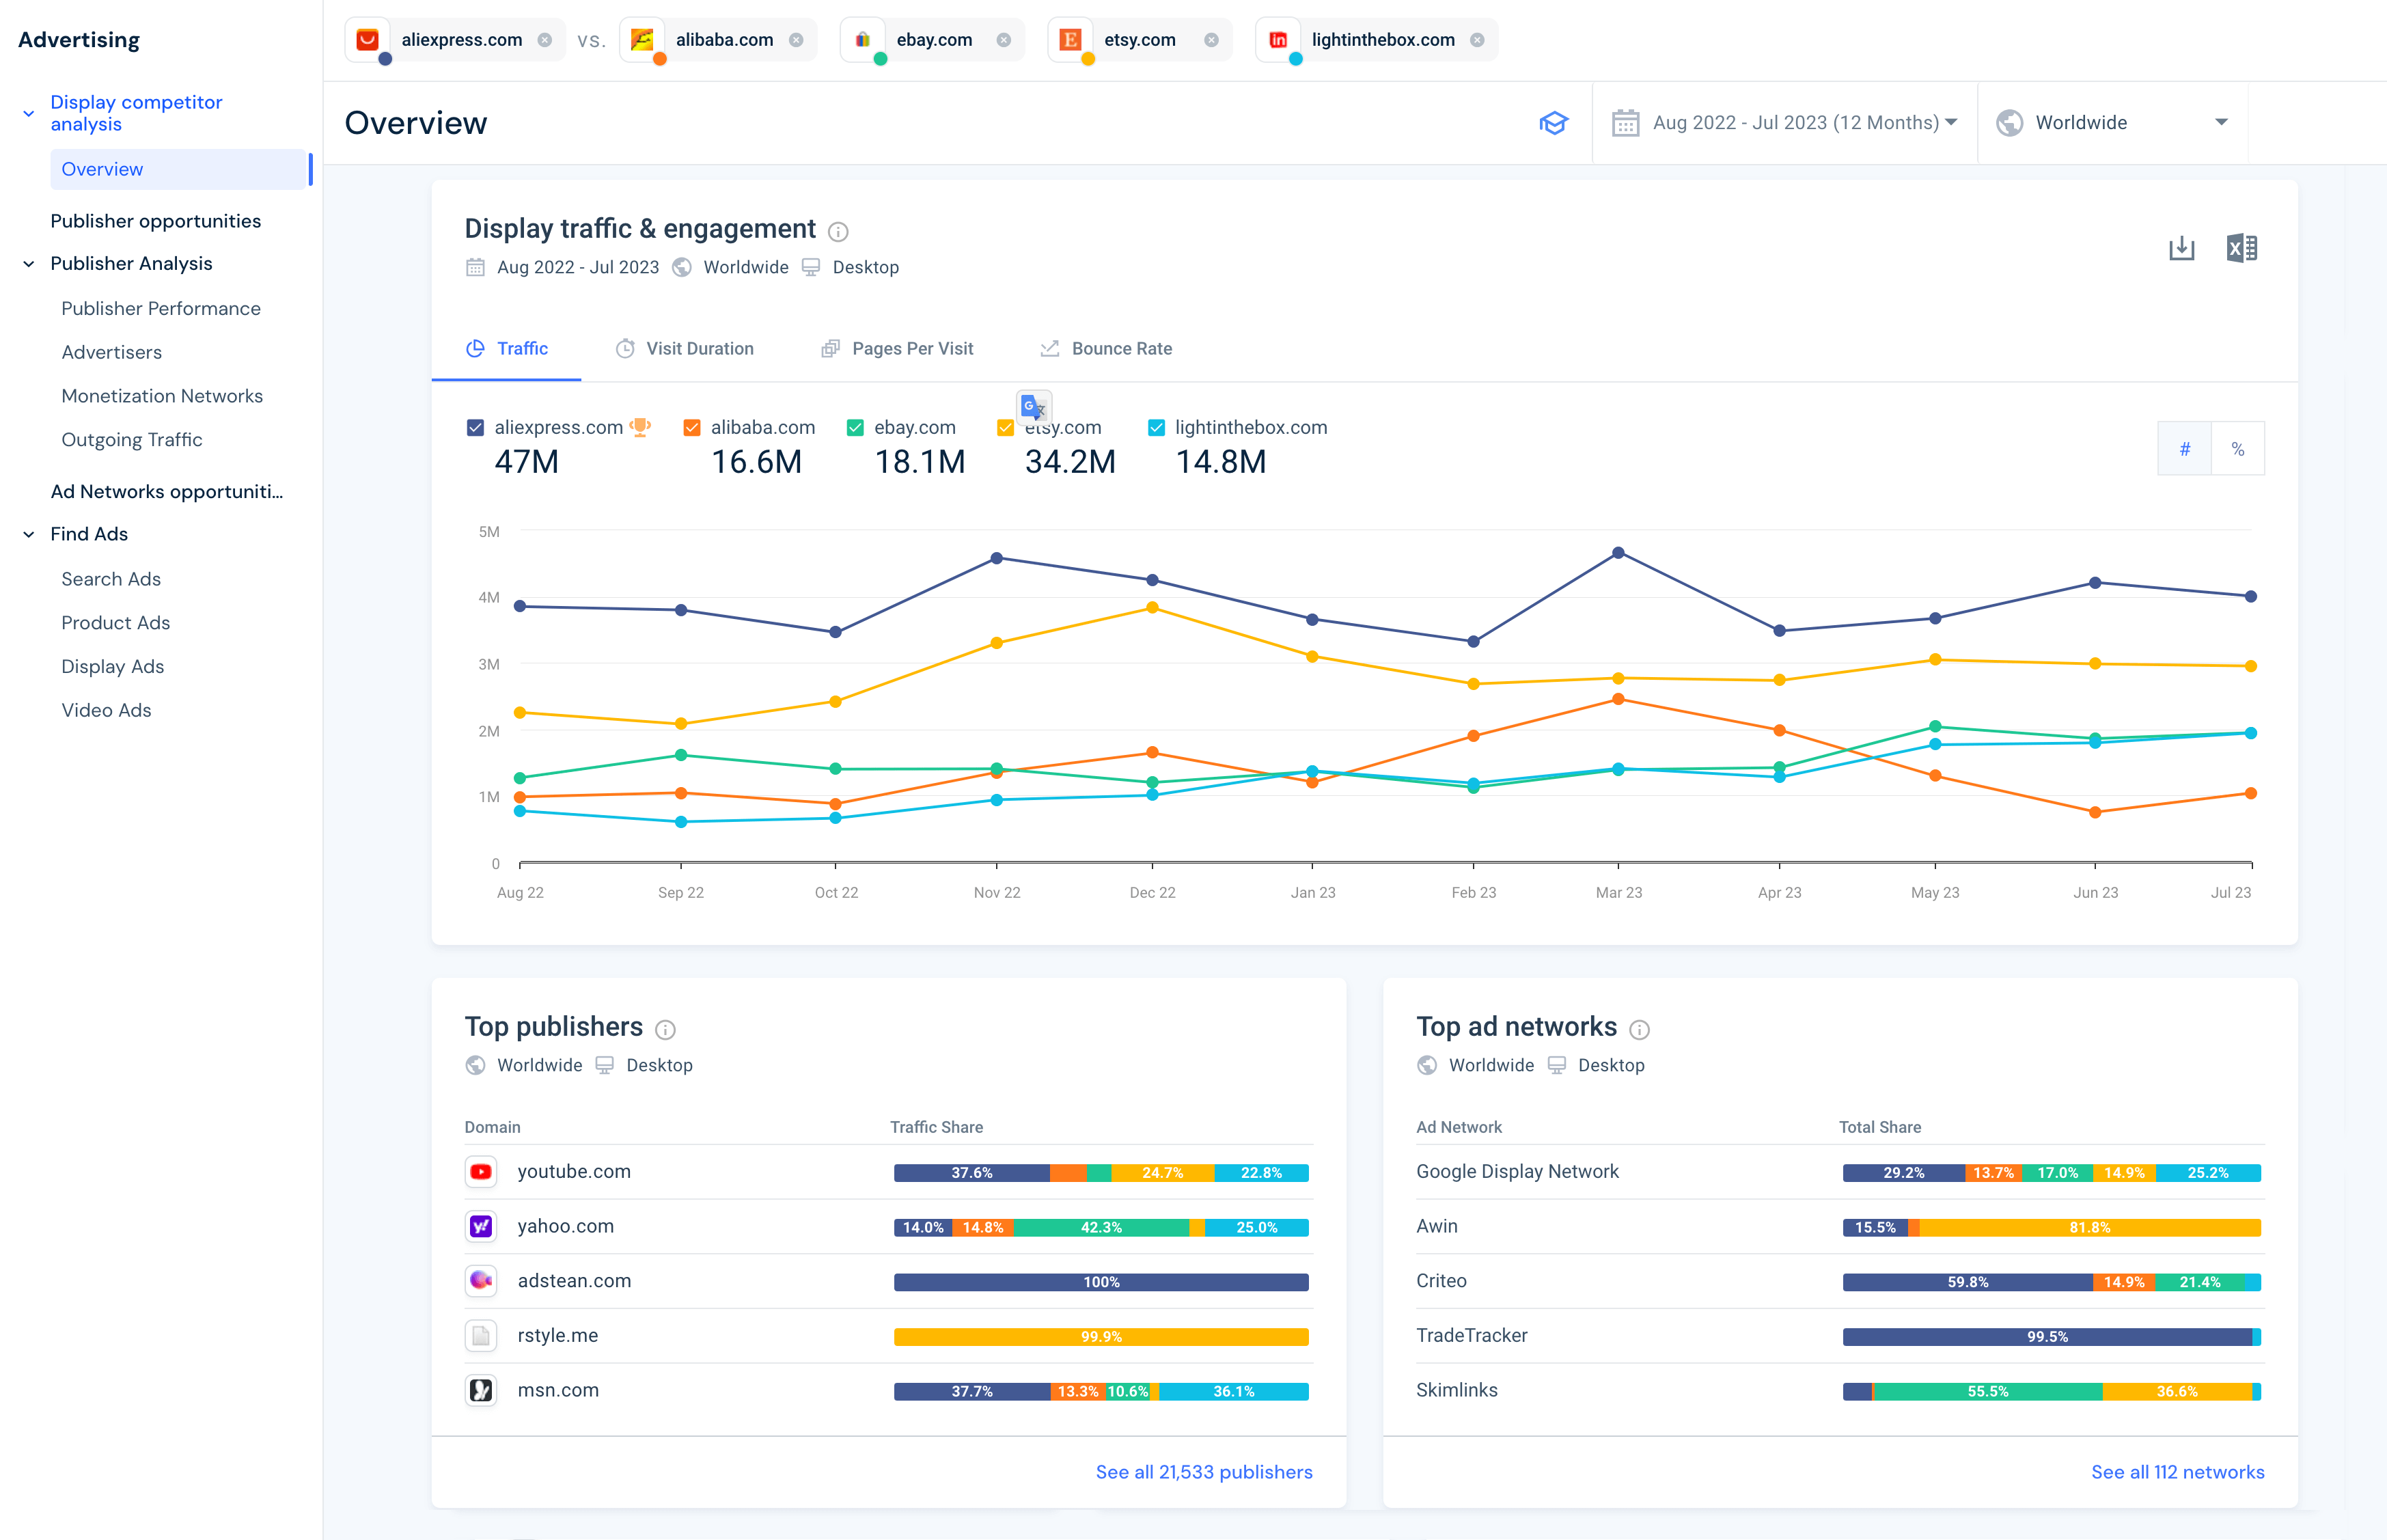 Similarweb data reveals which publishers and ad networks drive traffic to competitors and their best strategies.